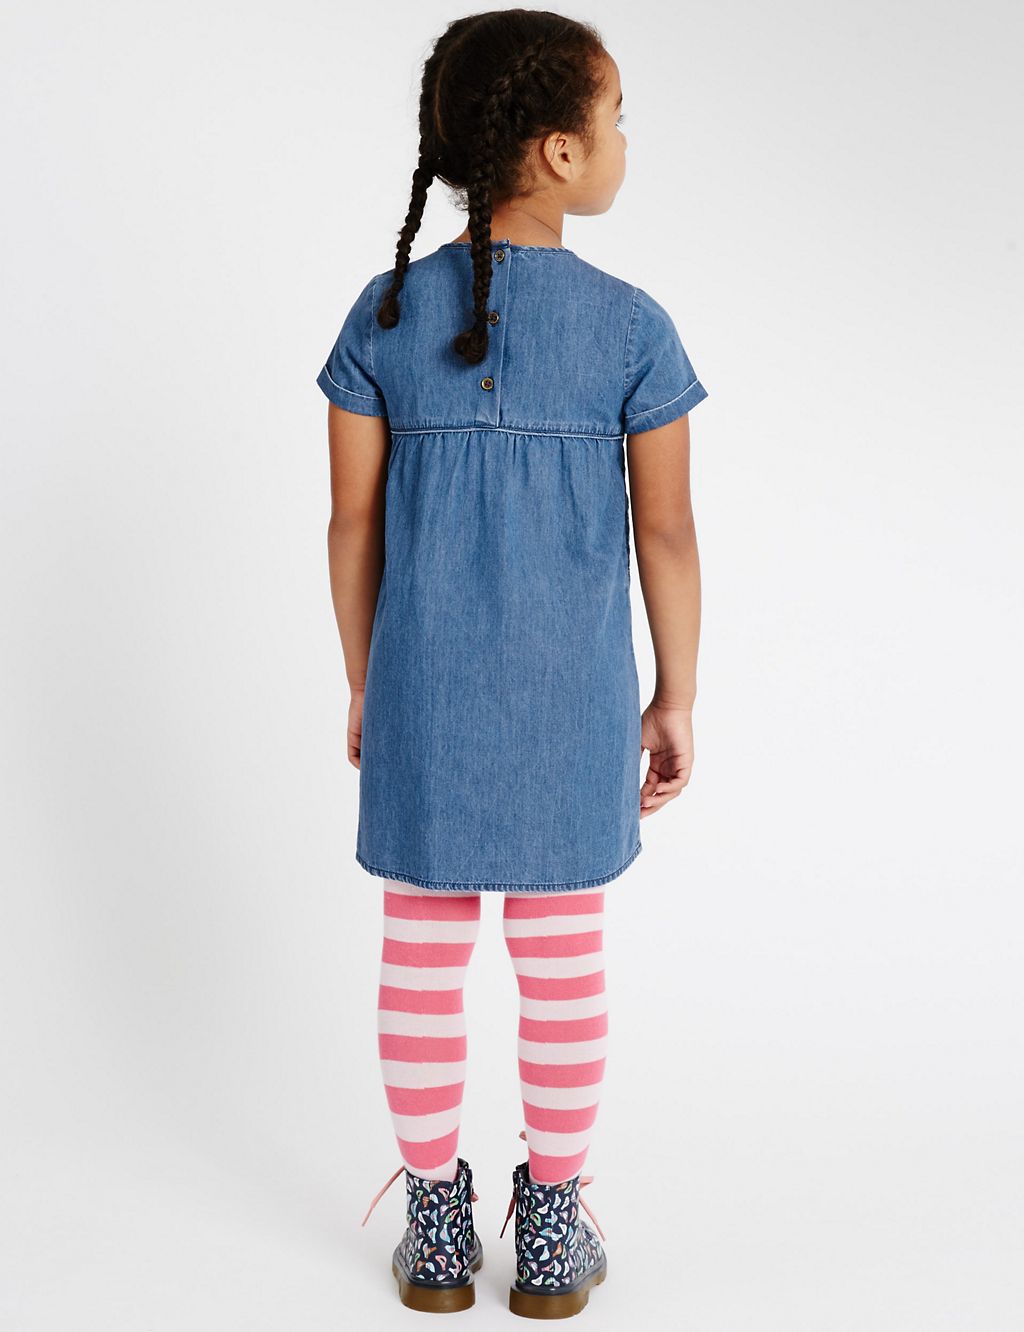 Pure Cotton Quilted Denim Dress (1-7 Years) 2 of 5